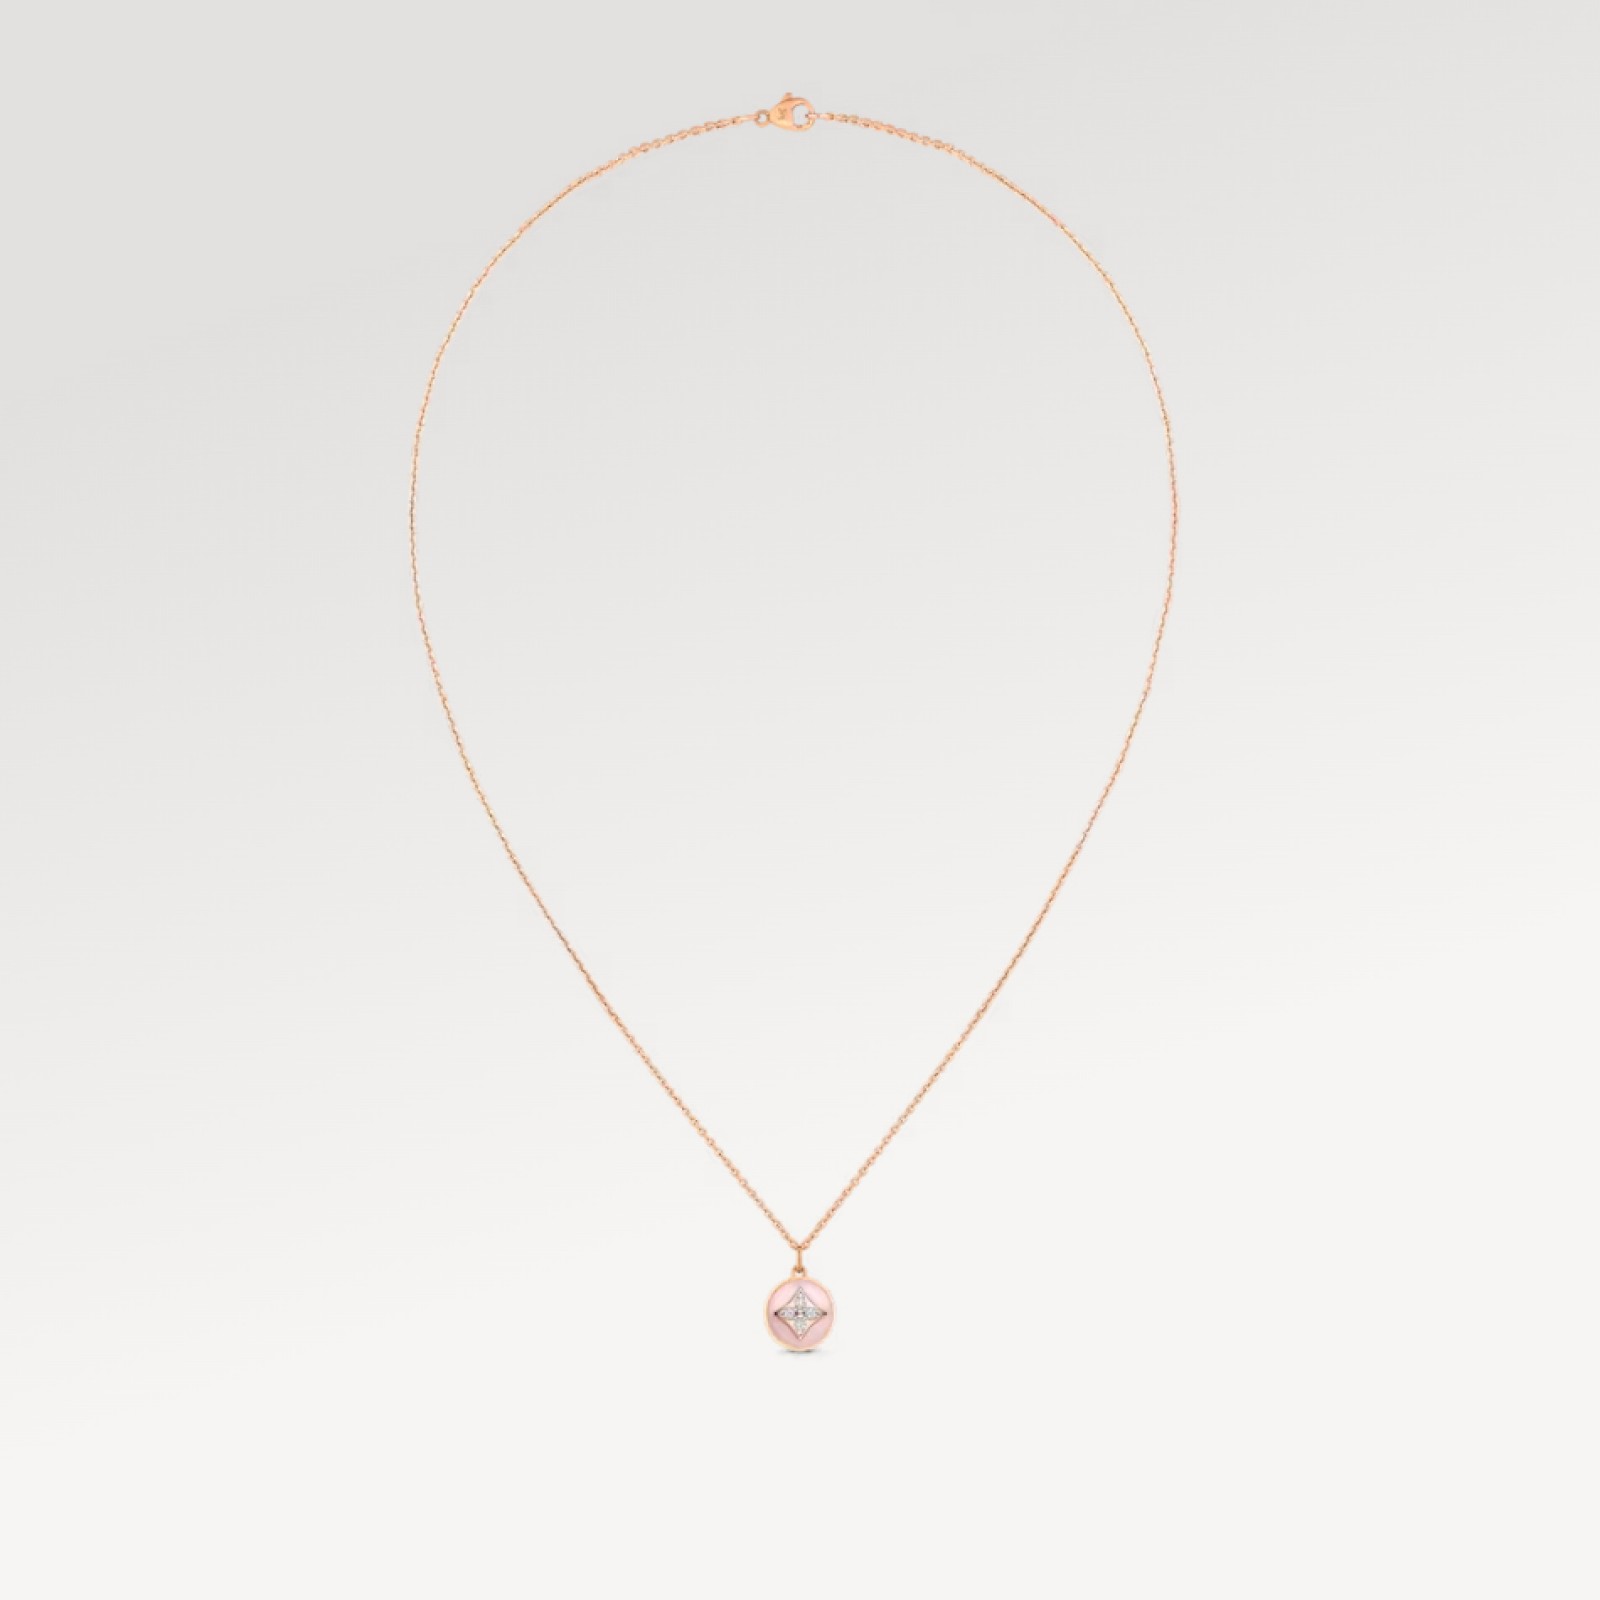 Color Blossom Pendant, Pink Gold, White Gold, Pink Opal And Diamonds